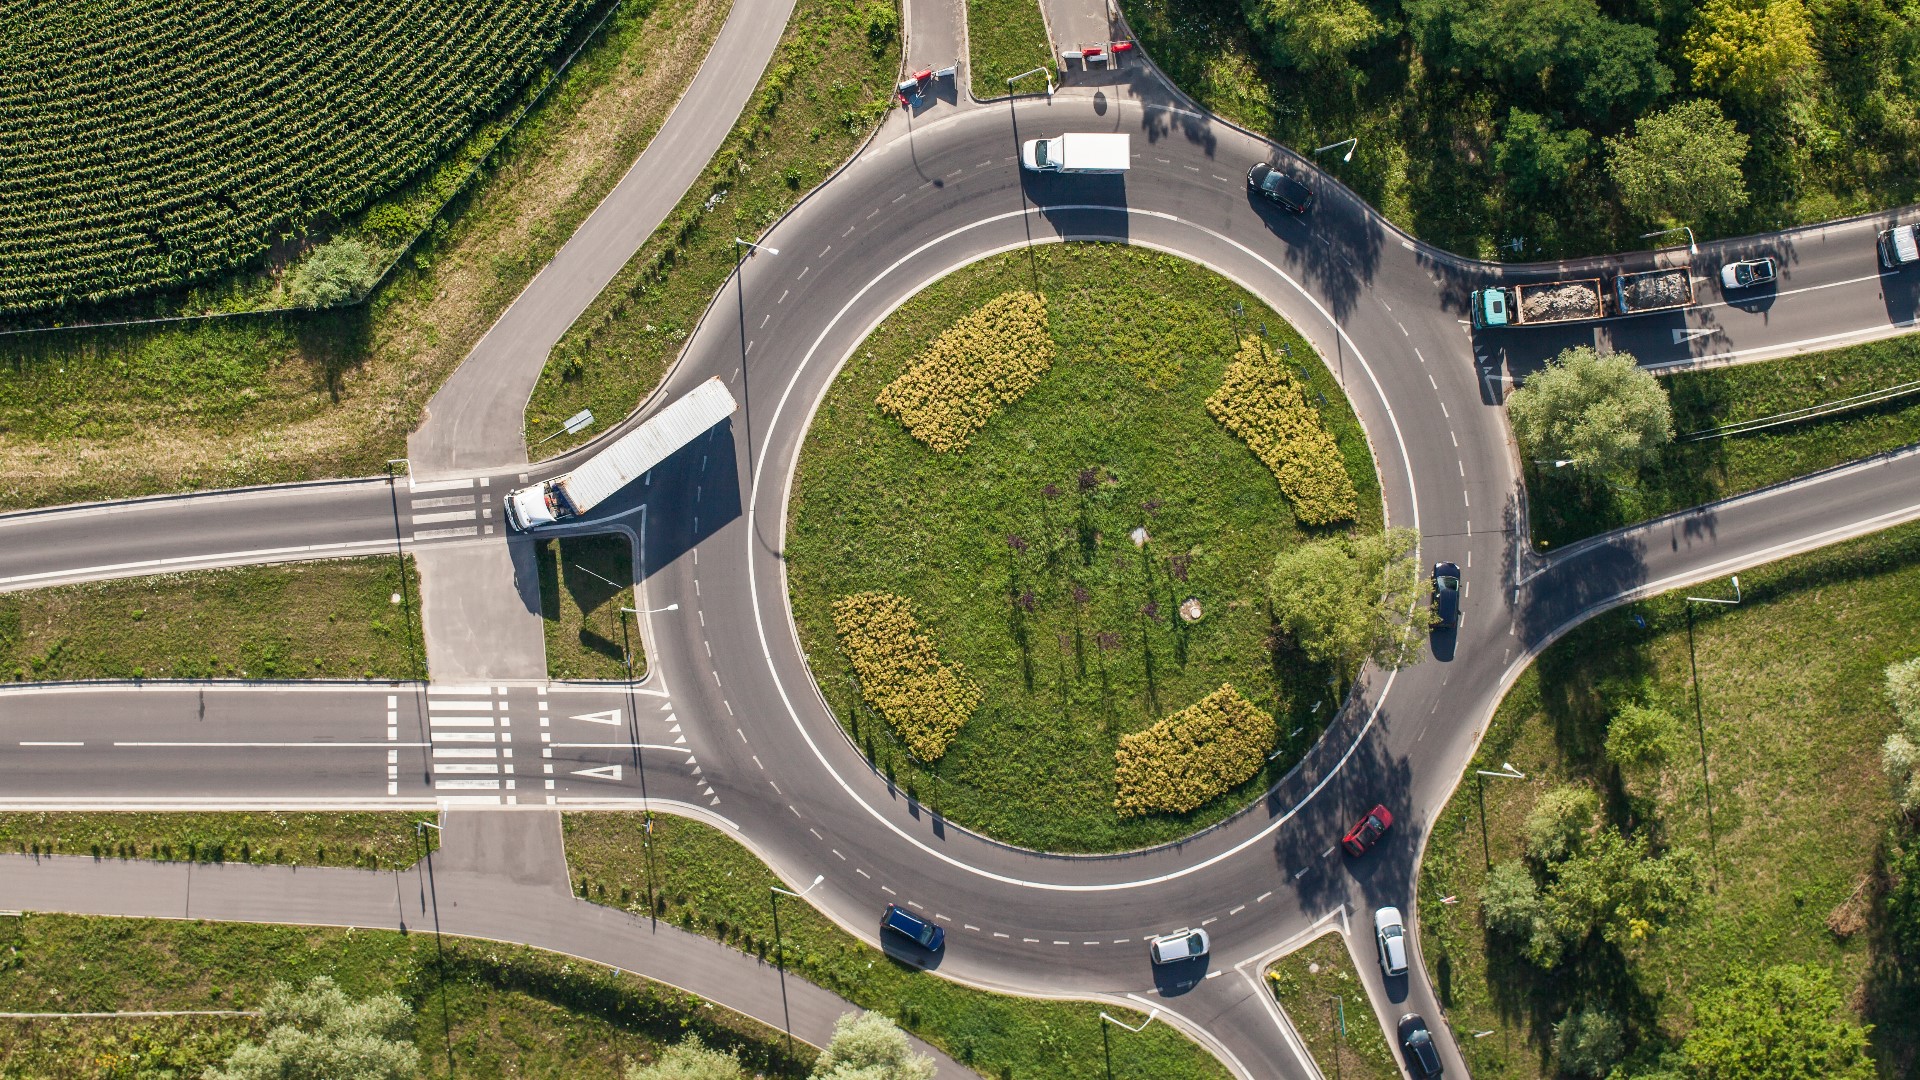 The City of Carmel is celebrating National Roundabouts Week Sept. 20-25.